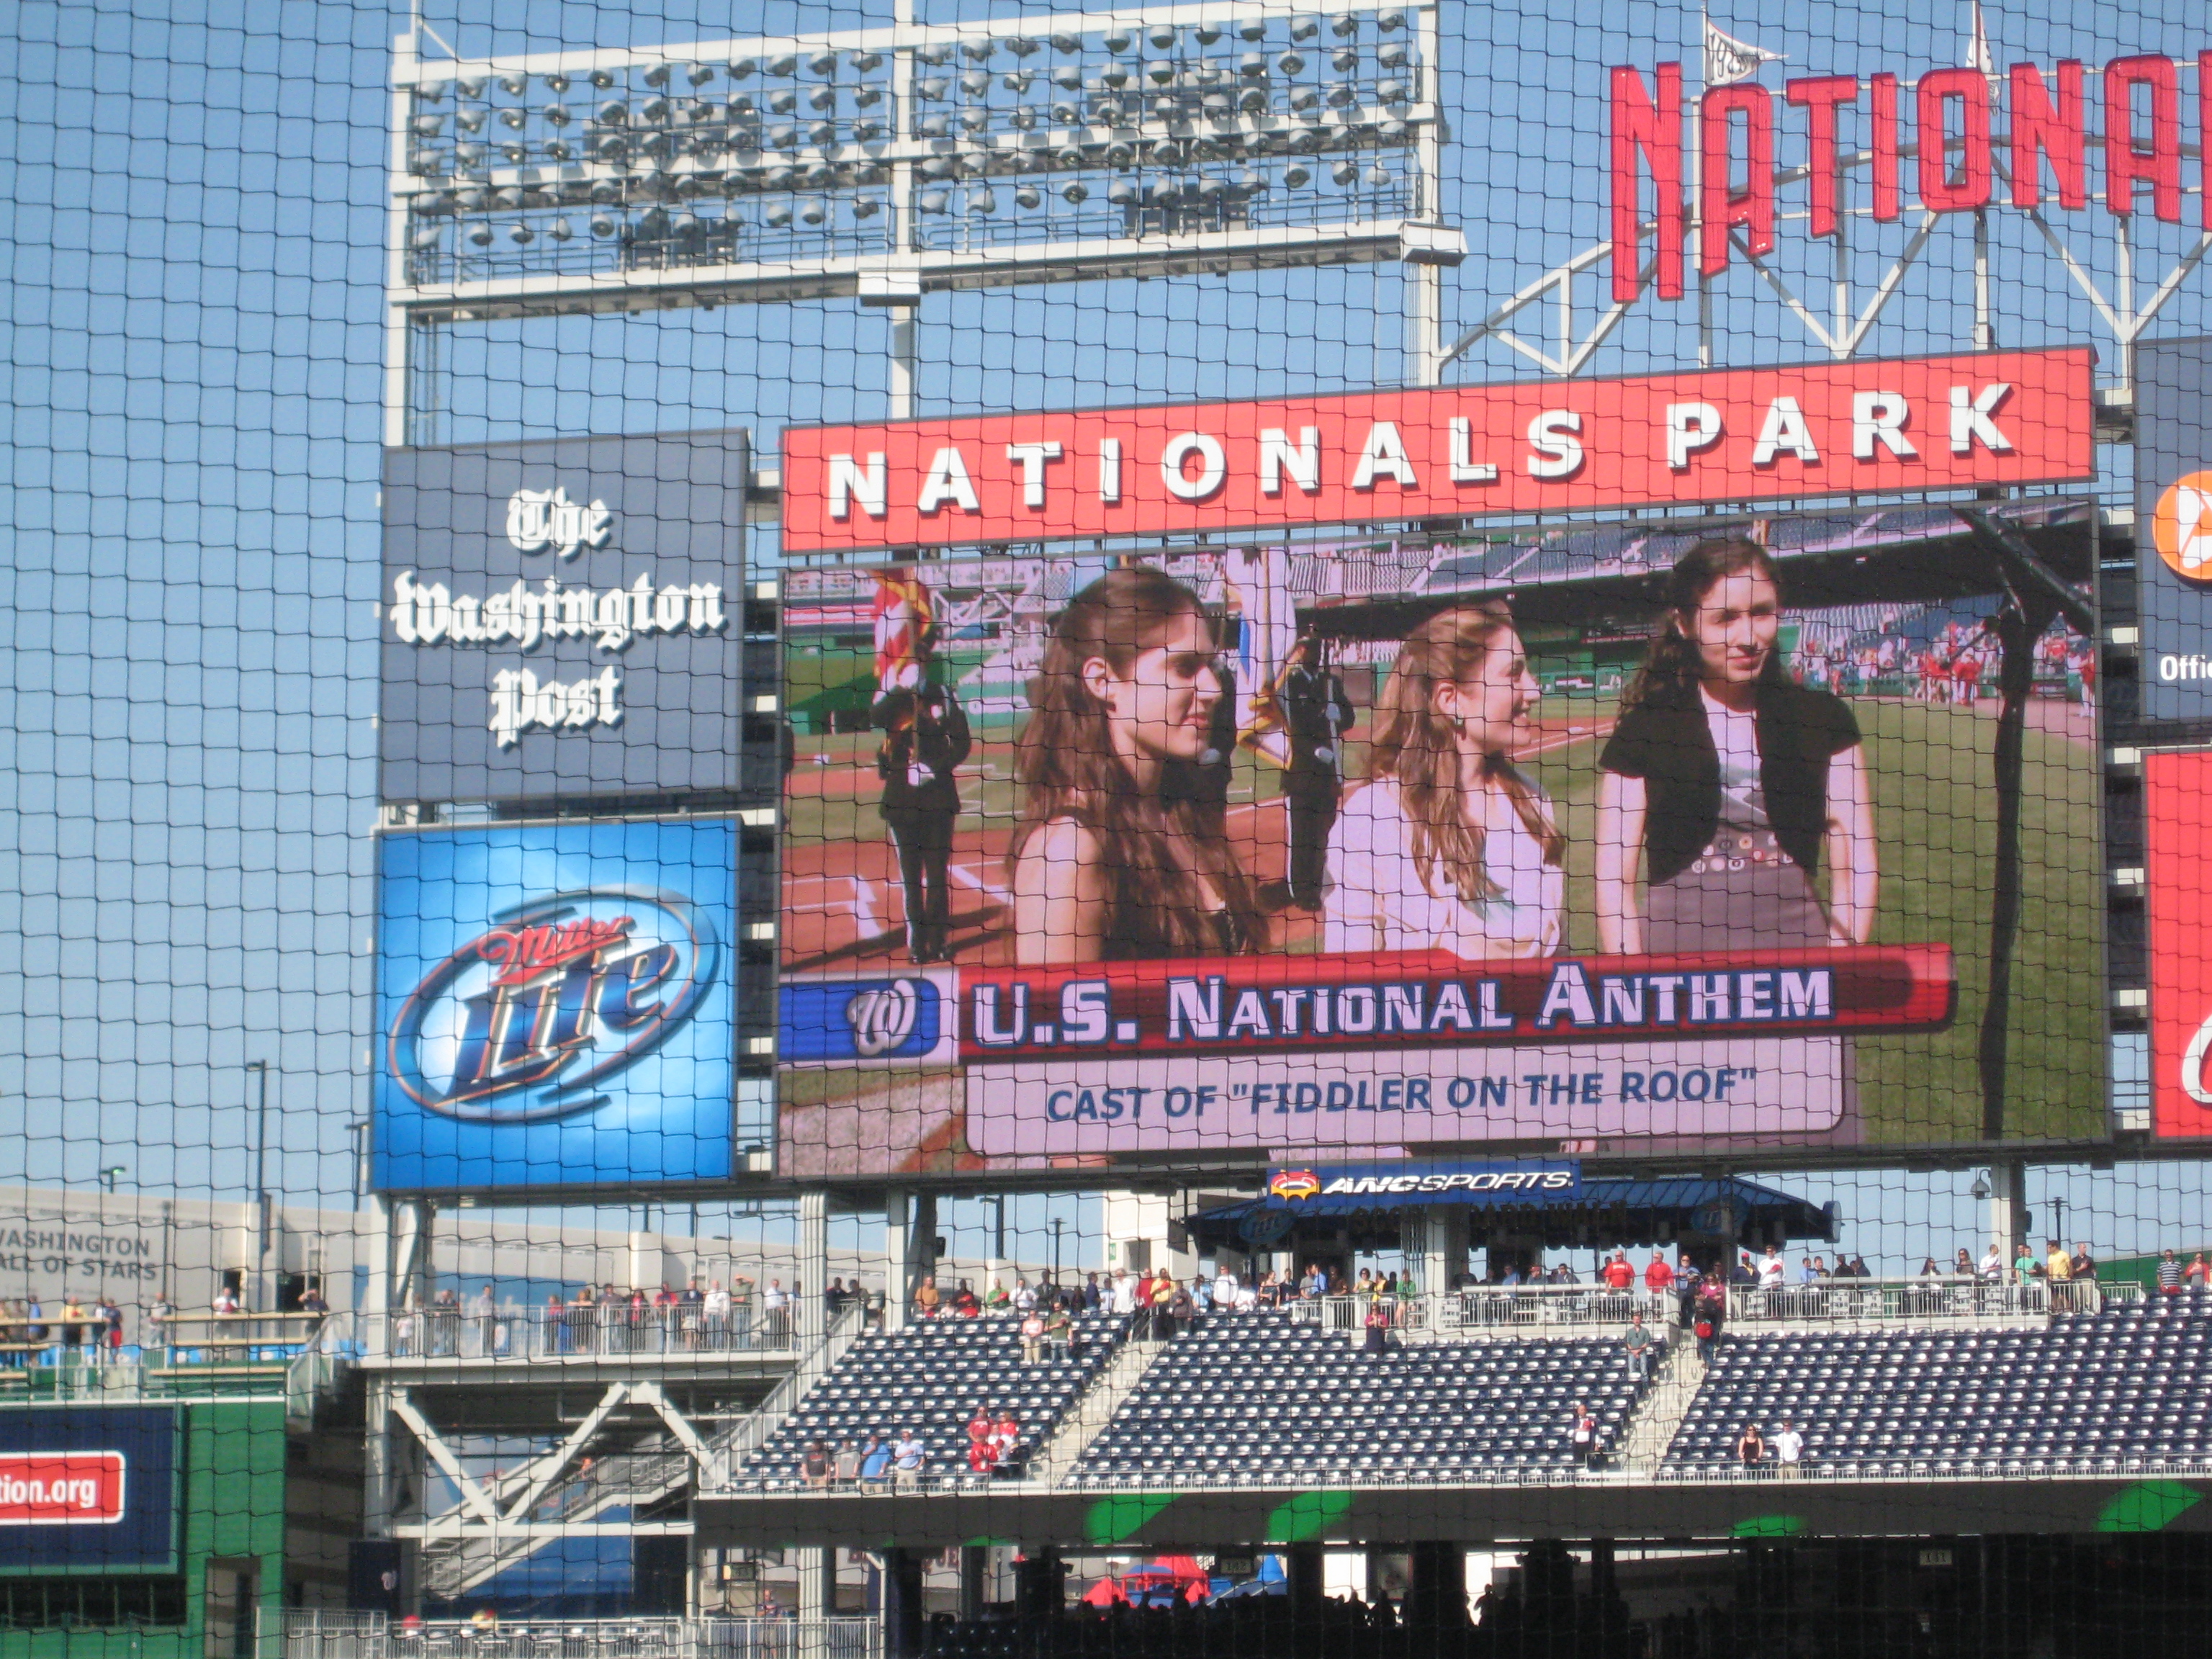 On the jumbotron singing the National Anthem at the Washington Nationals game in DC with Jamie Davis and Kaitlin Stilwell.